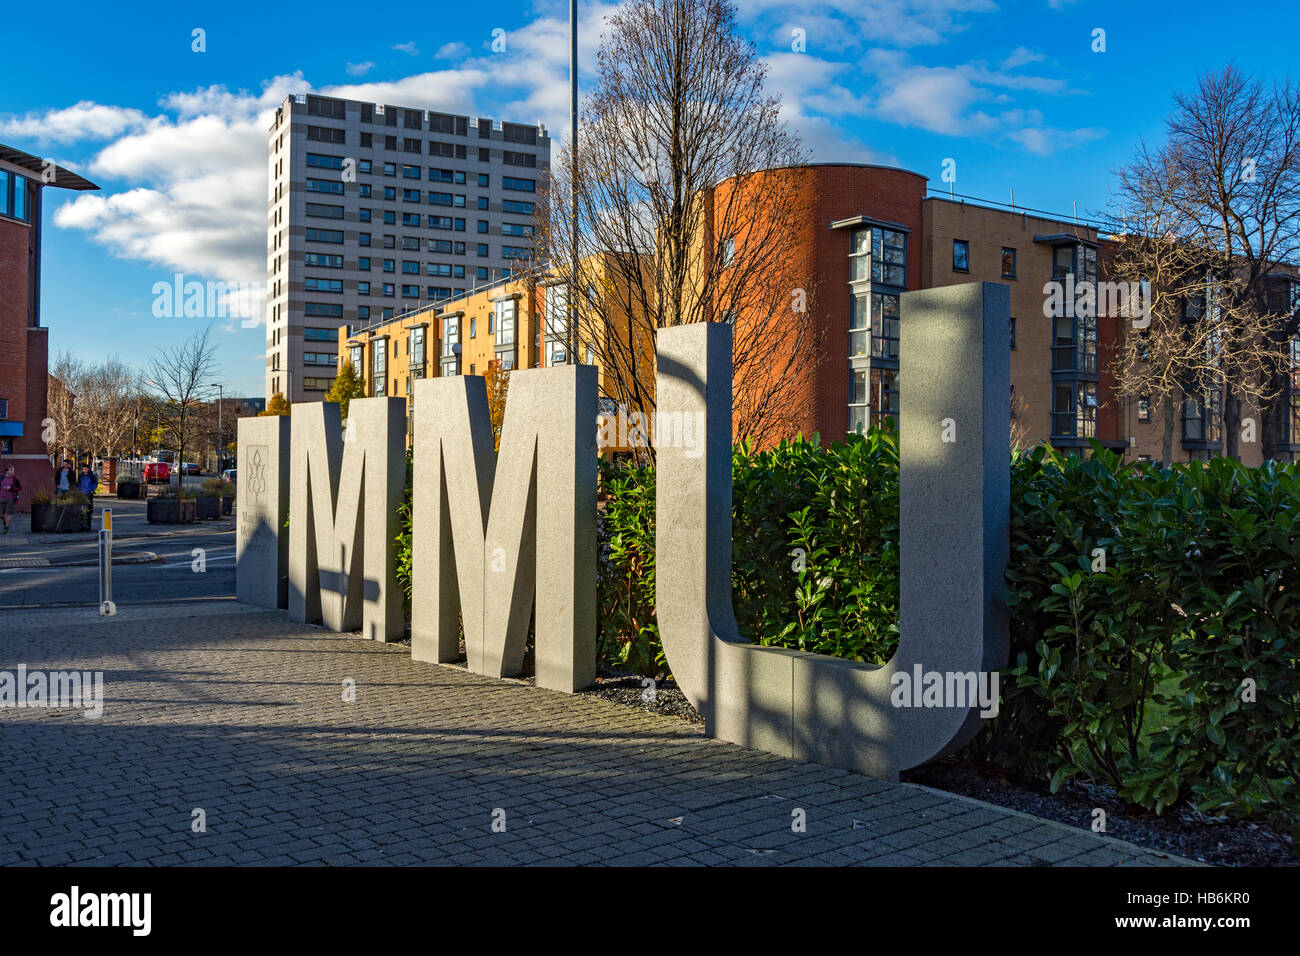 Large stone or concrete MMU sign for Manchester Metropolitan University, on a walkway off Boundary Lane, Manchester, UK Stock Photo